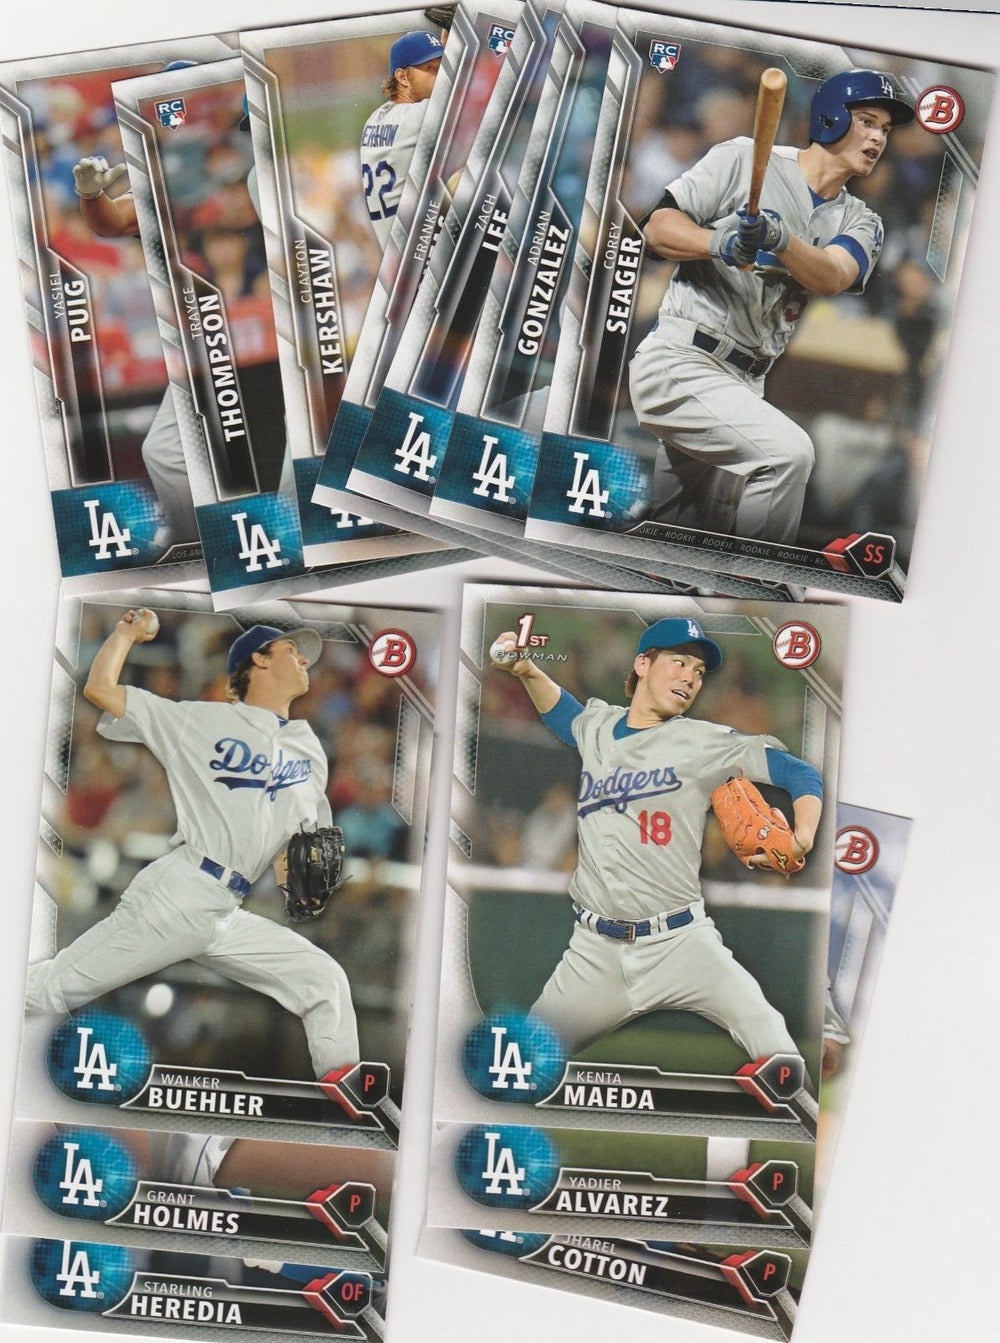 Los Angeles Dodgers 2016 Bowman Team Set with Prospects including Corey Seager Rookie Card Plus